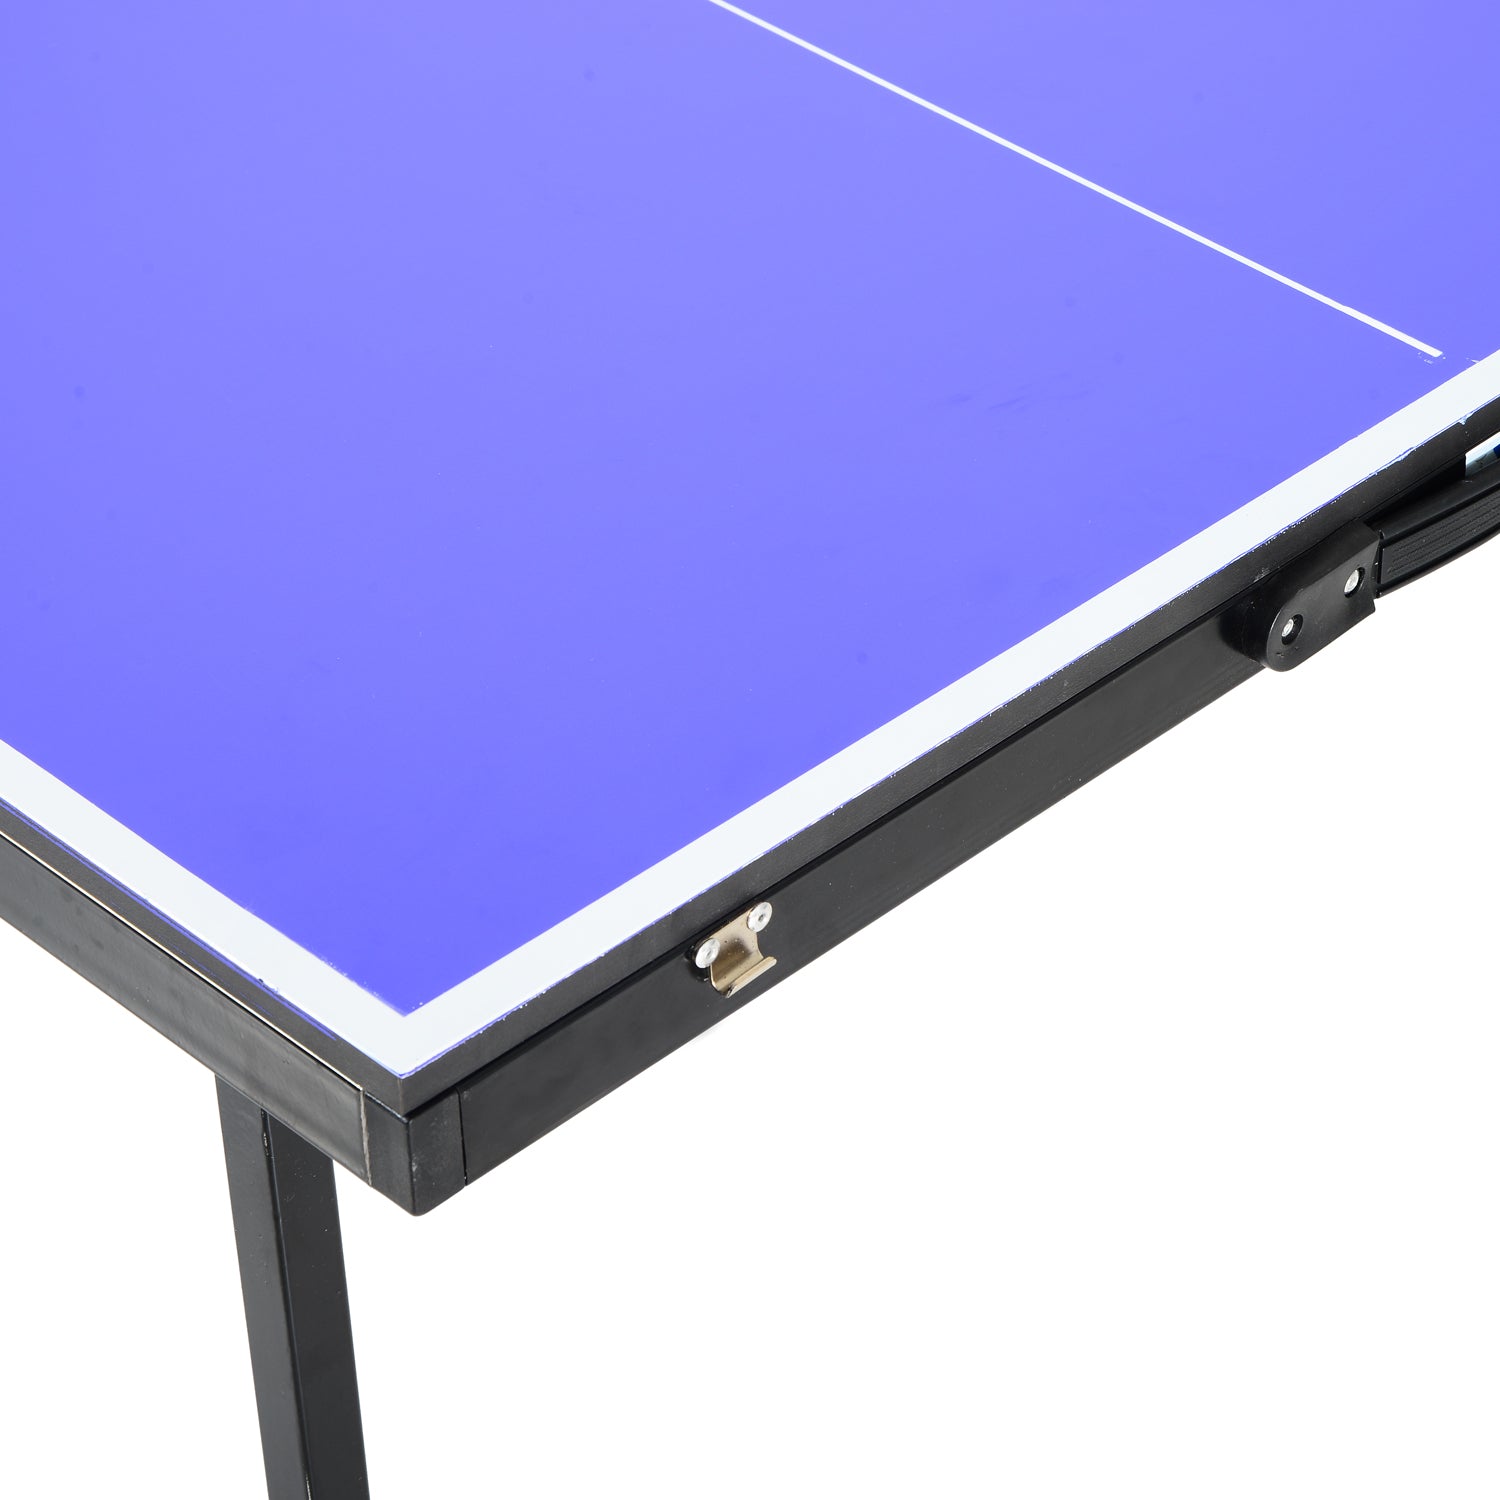 HOMCOM Folding Mini Compact Table Tennis Top Ping Pong Table Set Professional Net Games Sports Training Play Blue - Inspirely